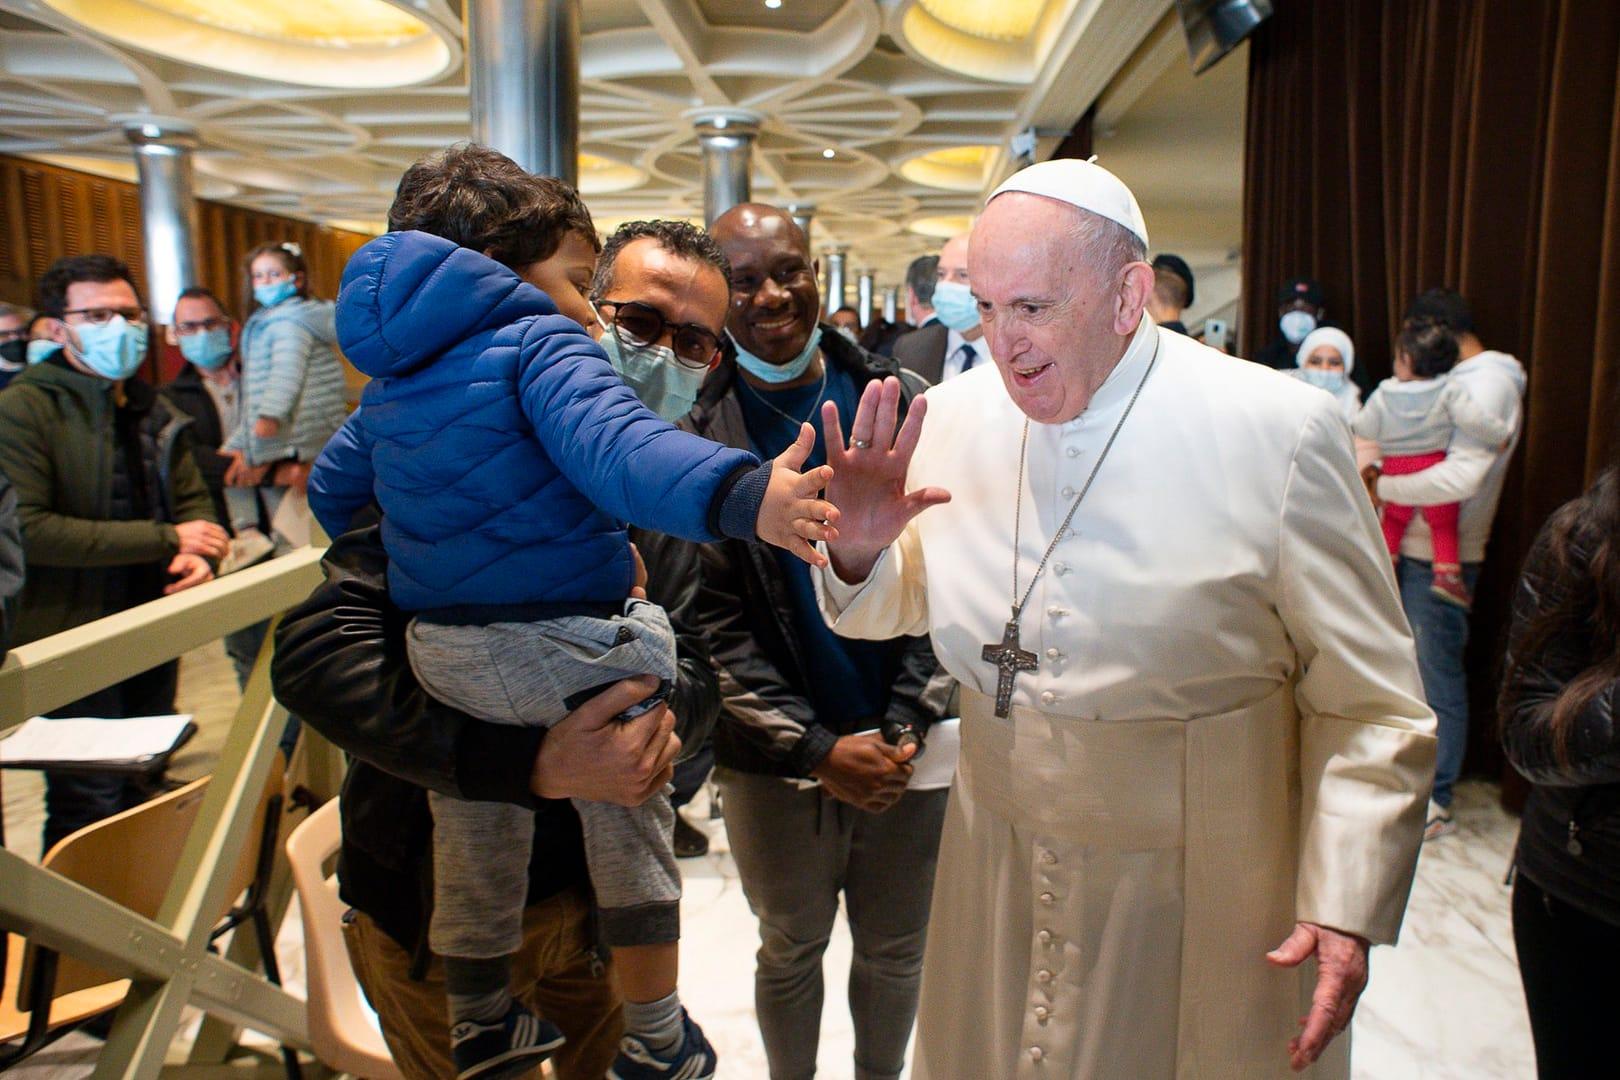 Pope celebrates name day at Vatican vaccination clinic